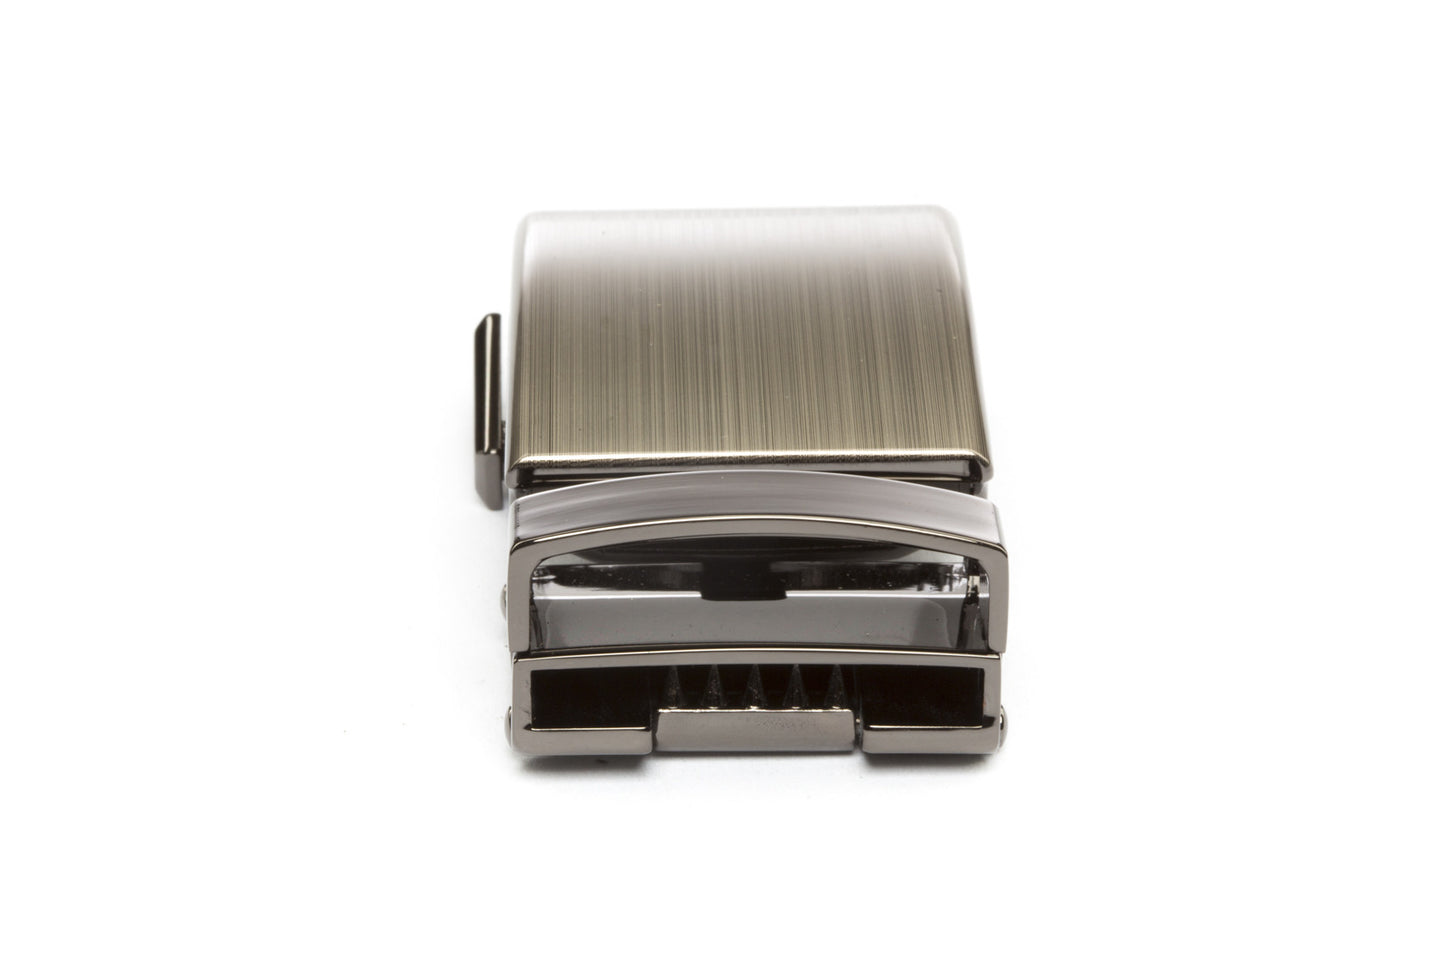 Men's classic ratchet belt buckle in formal gunmetal with a 1.25-inch width, rear view.